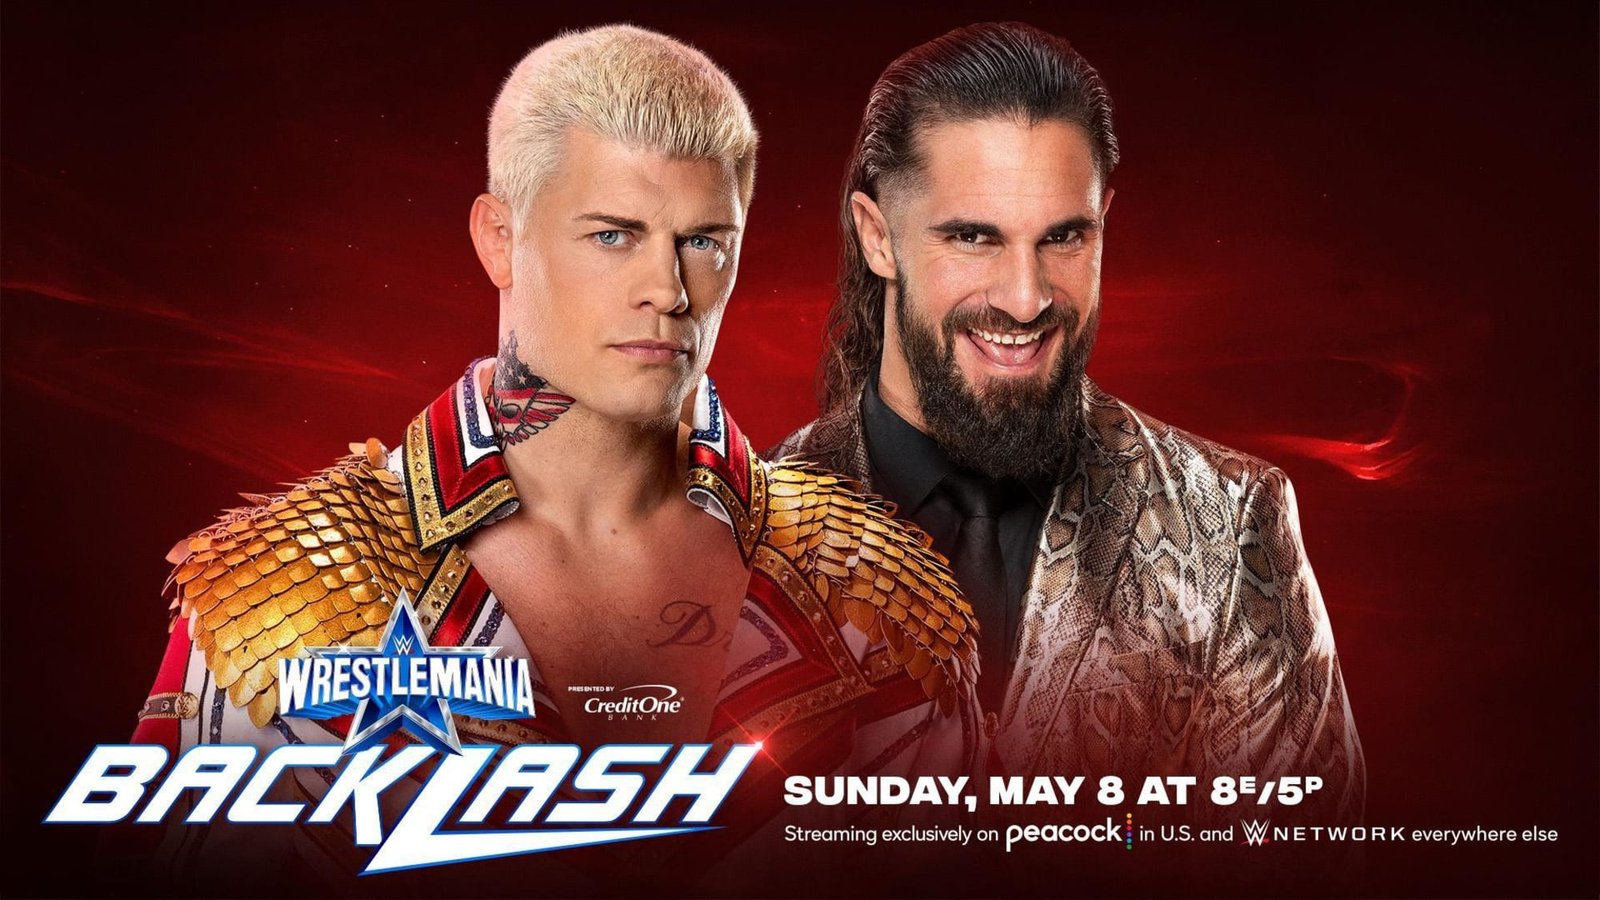 WWE WrestleMania Backlash live results and highlights